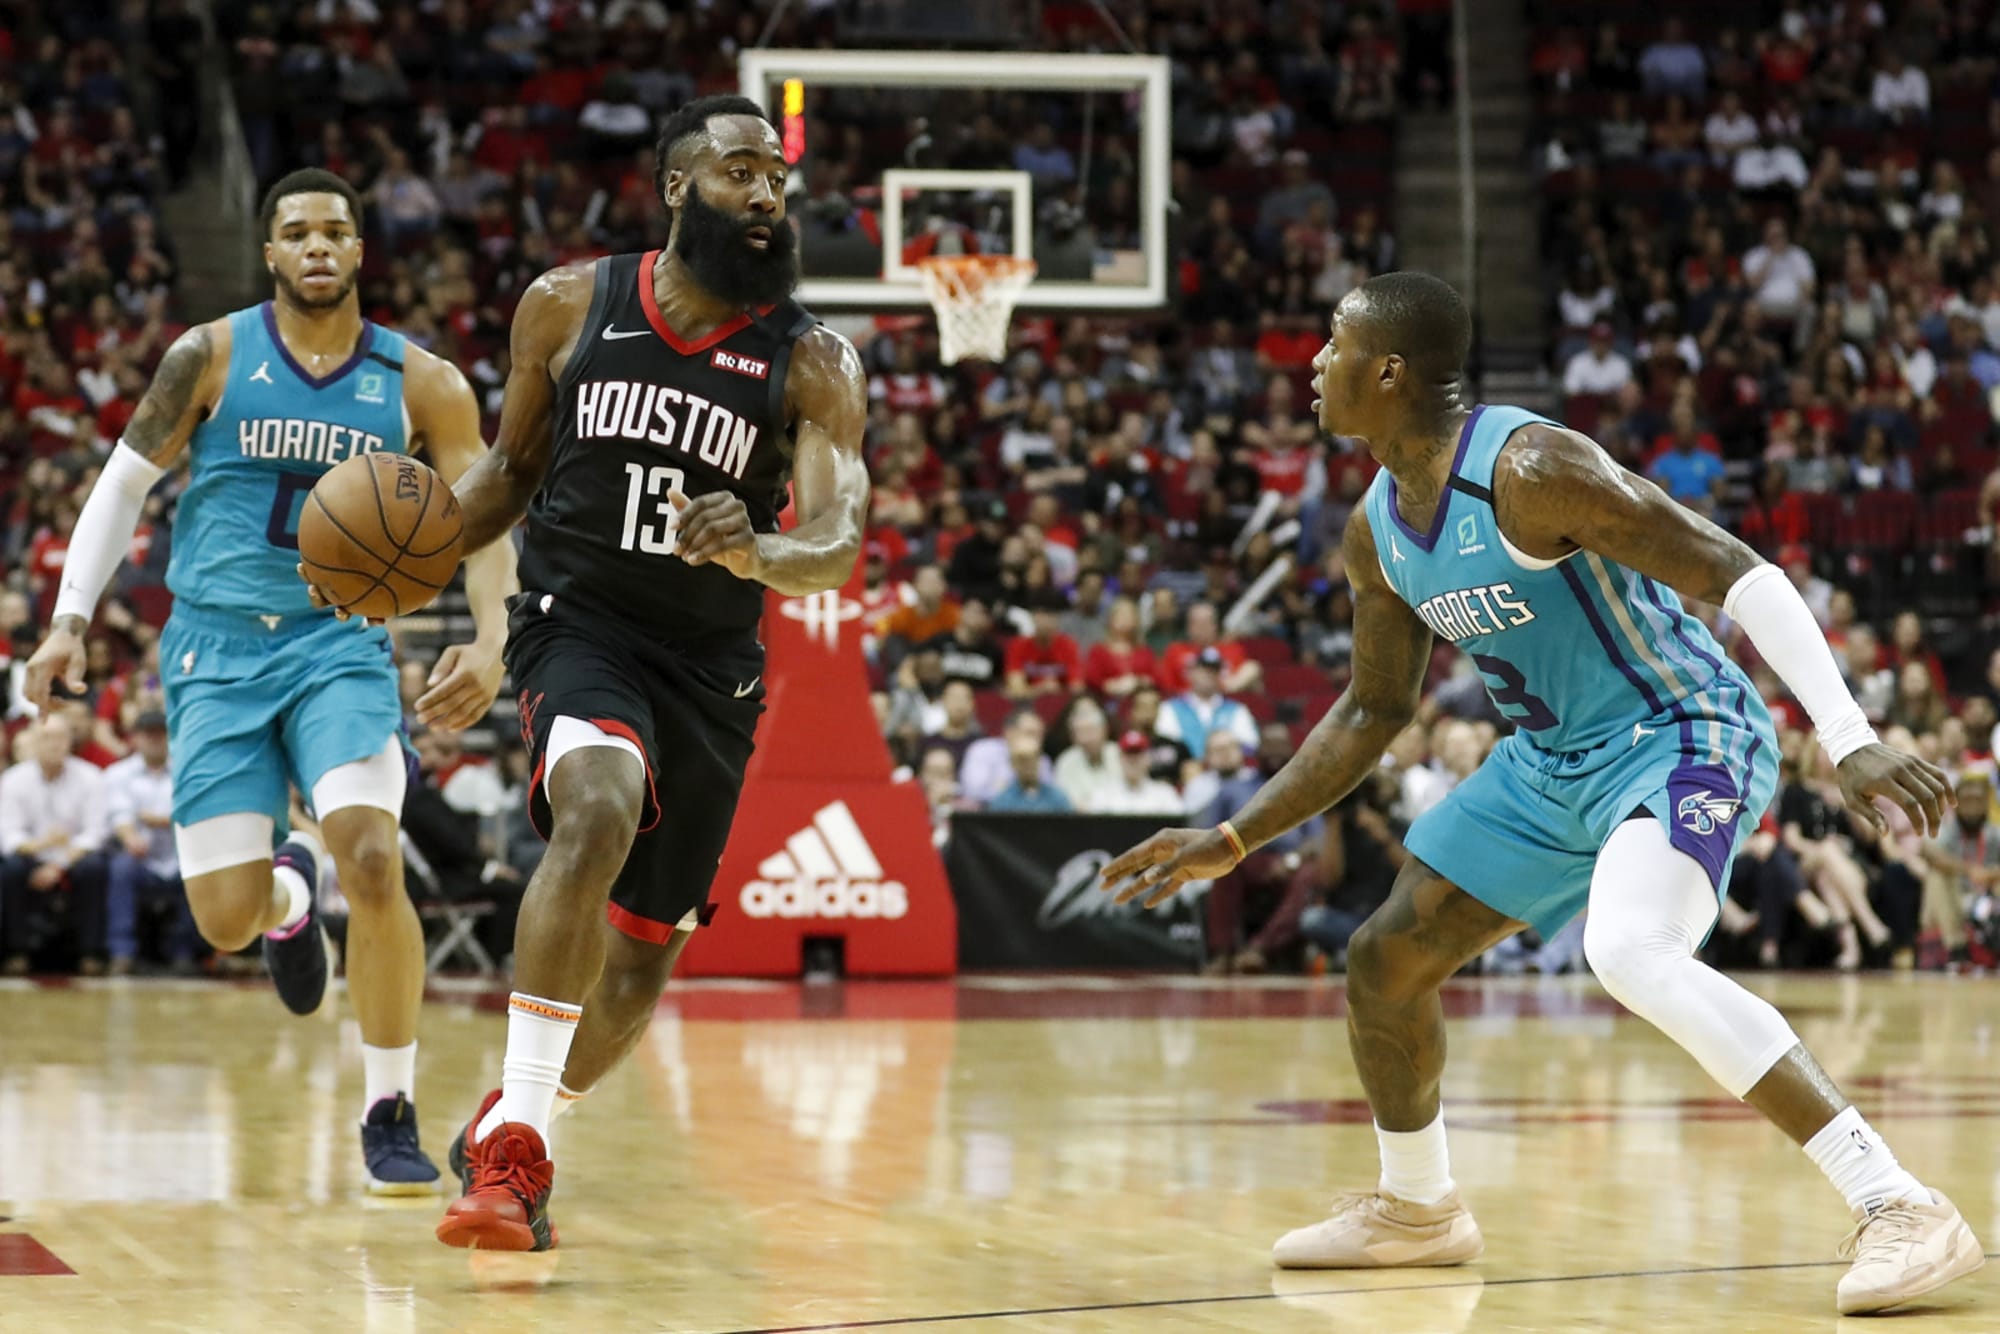 Charlotte Game preview and things to watch against Rockets